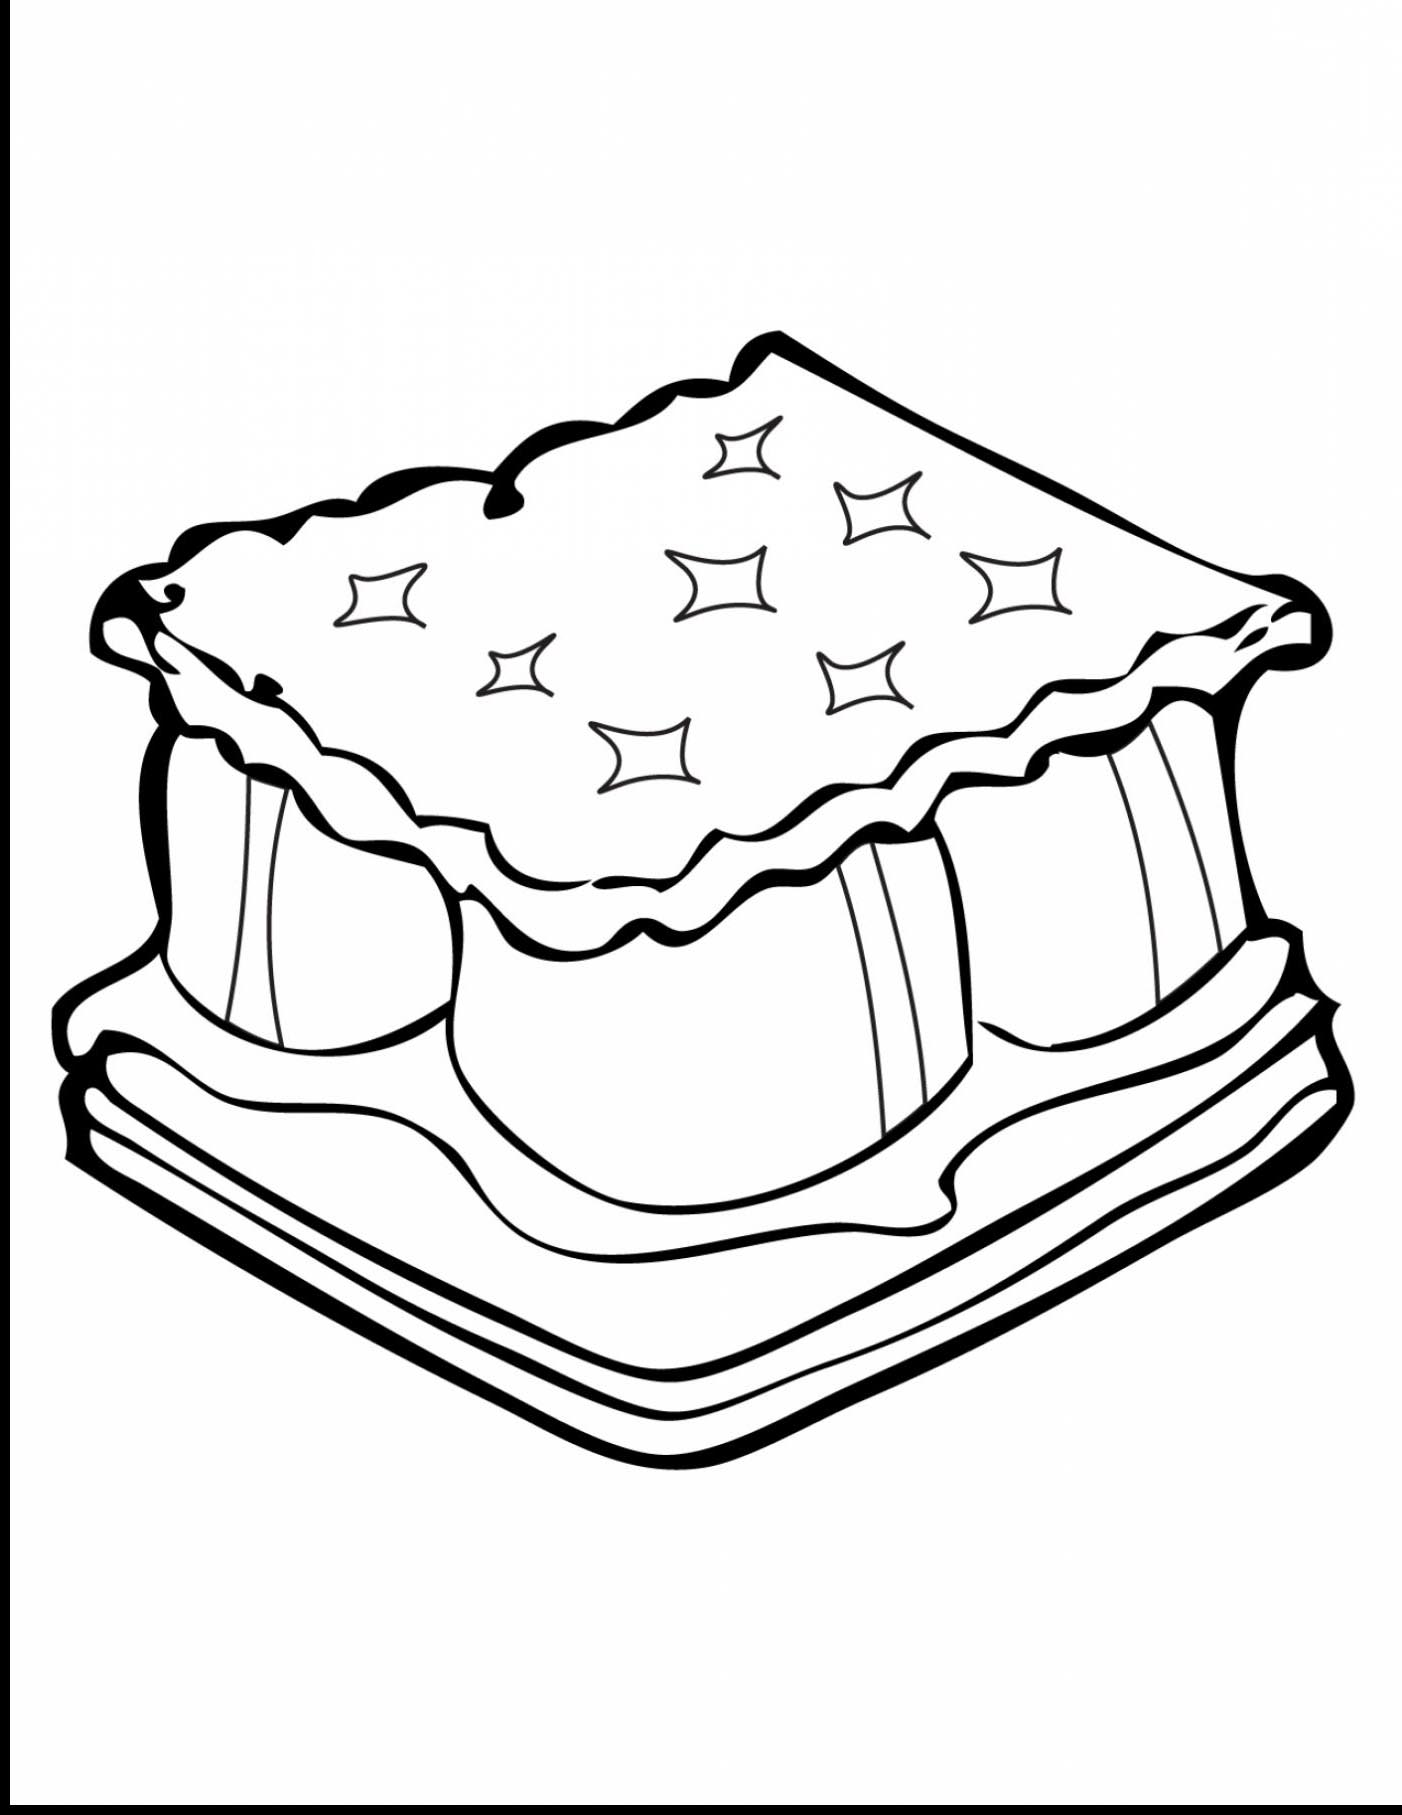 Smores clipart black and white. Clip art free cliparts